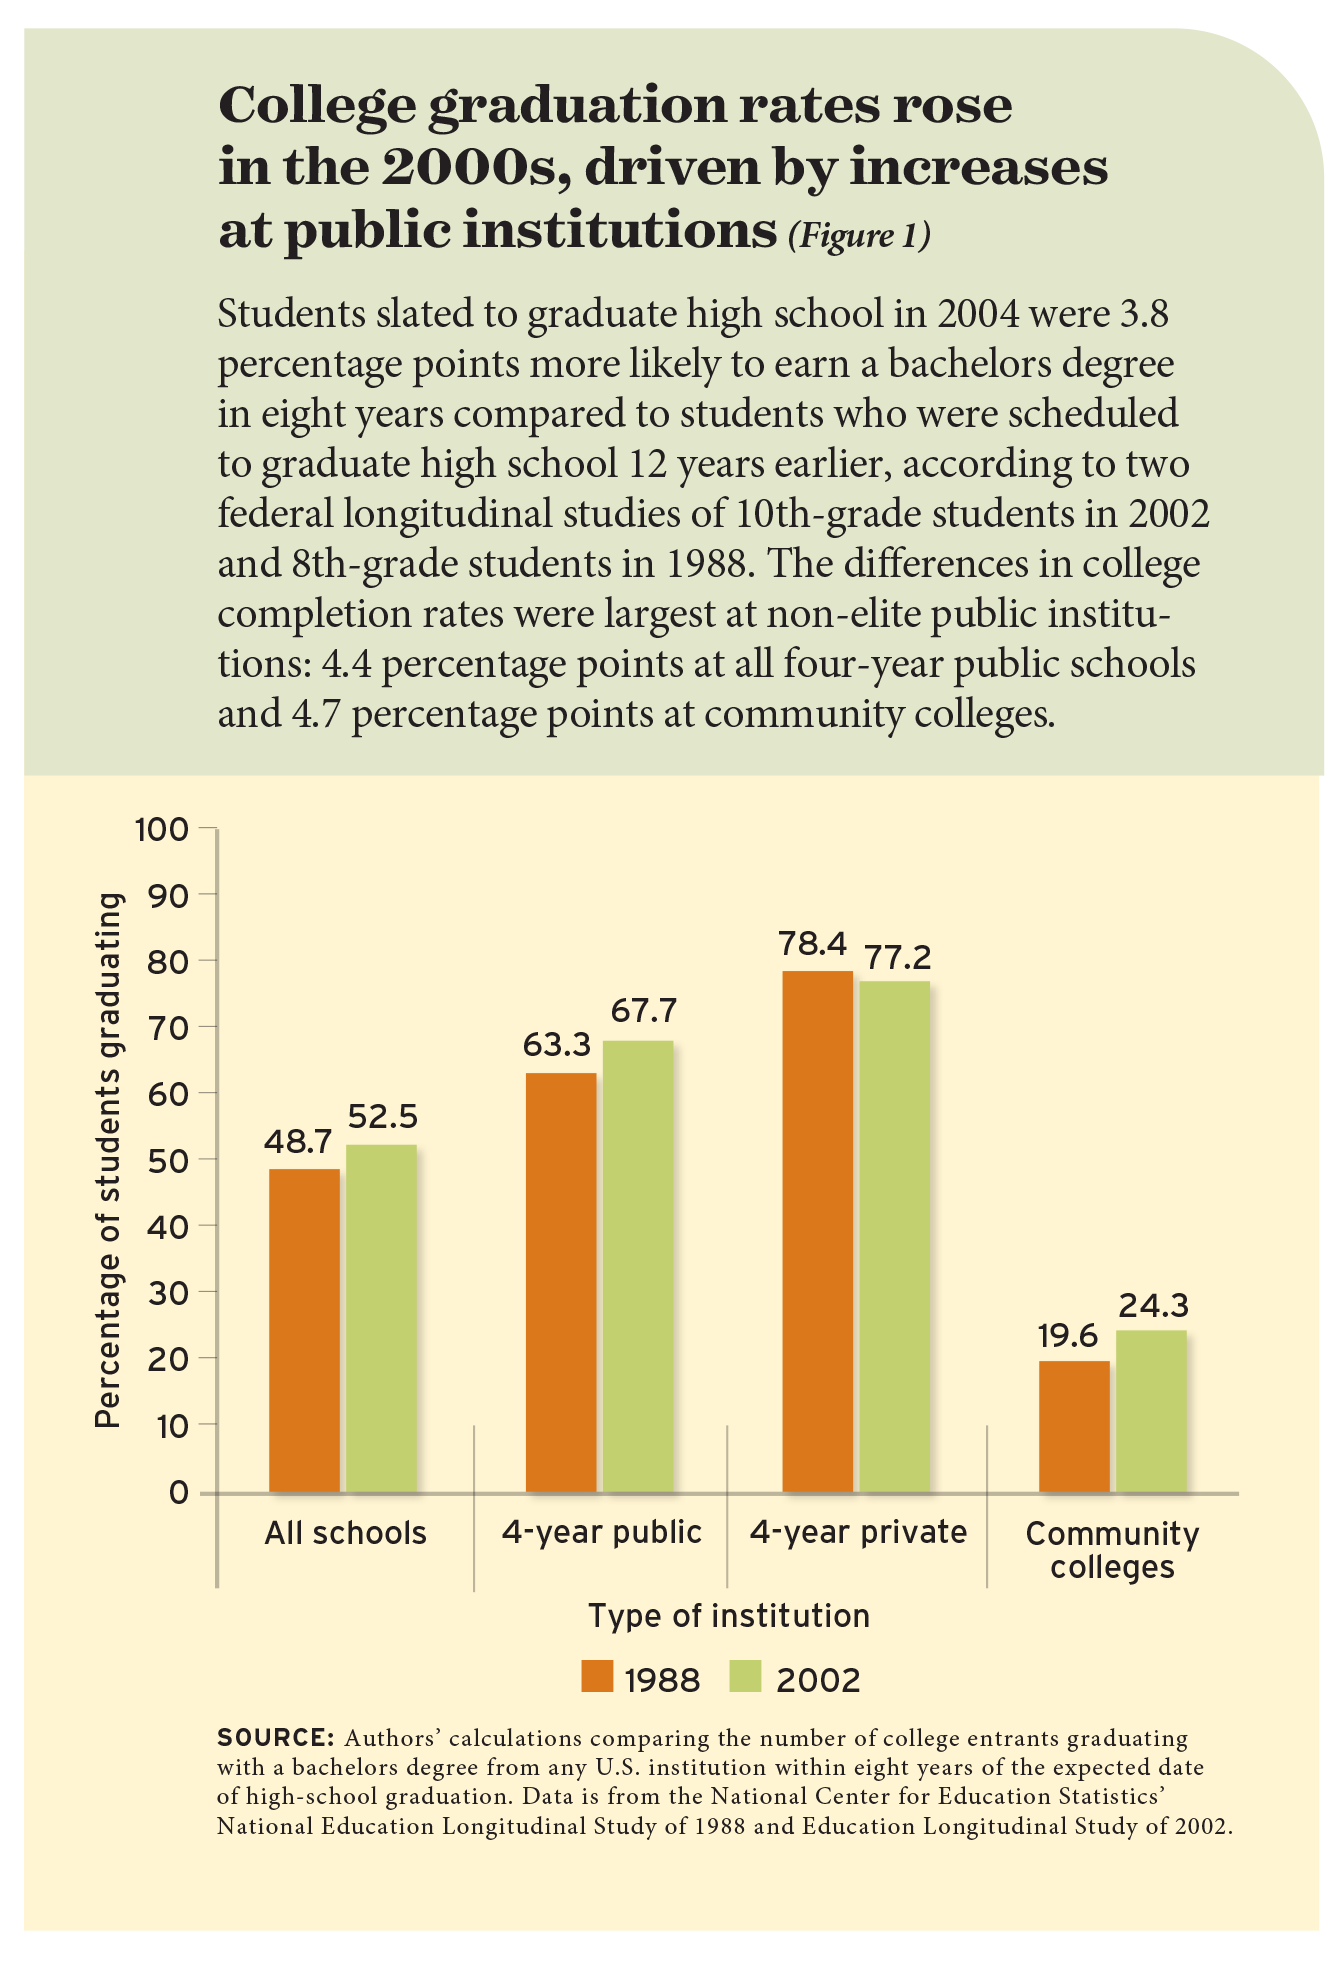 Figure 1: College graduation rates rose in the 2000s, driven by increases at public institutions